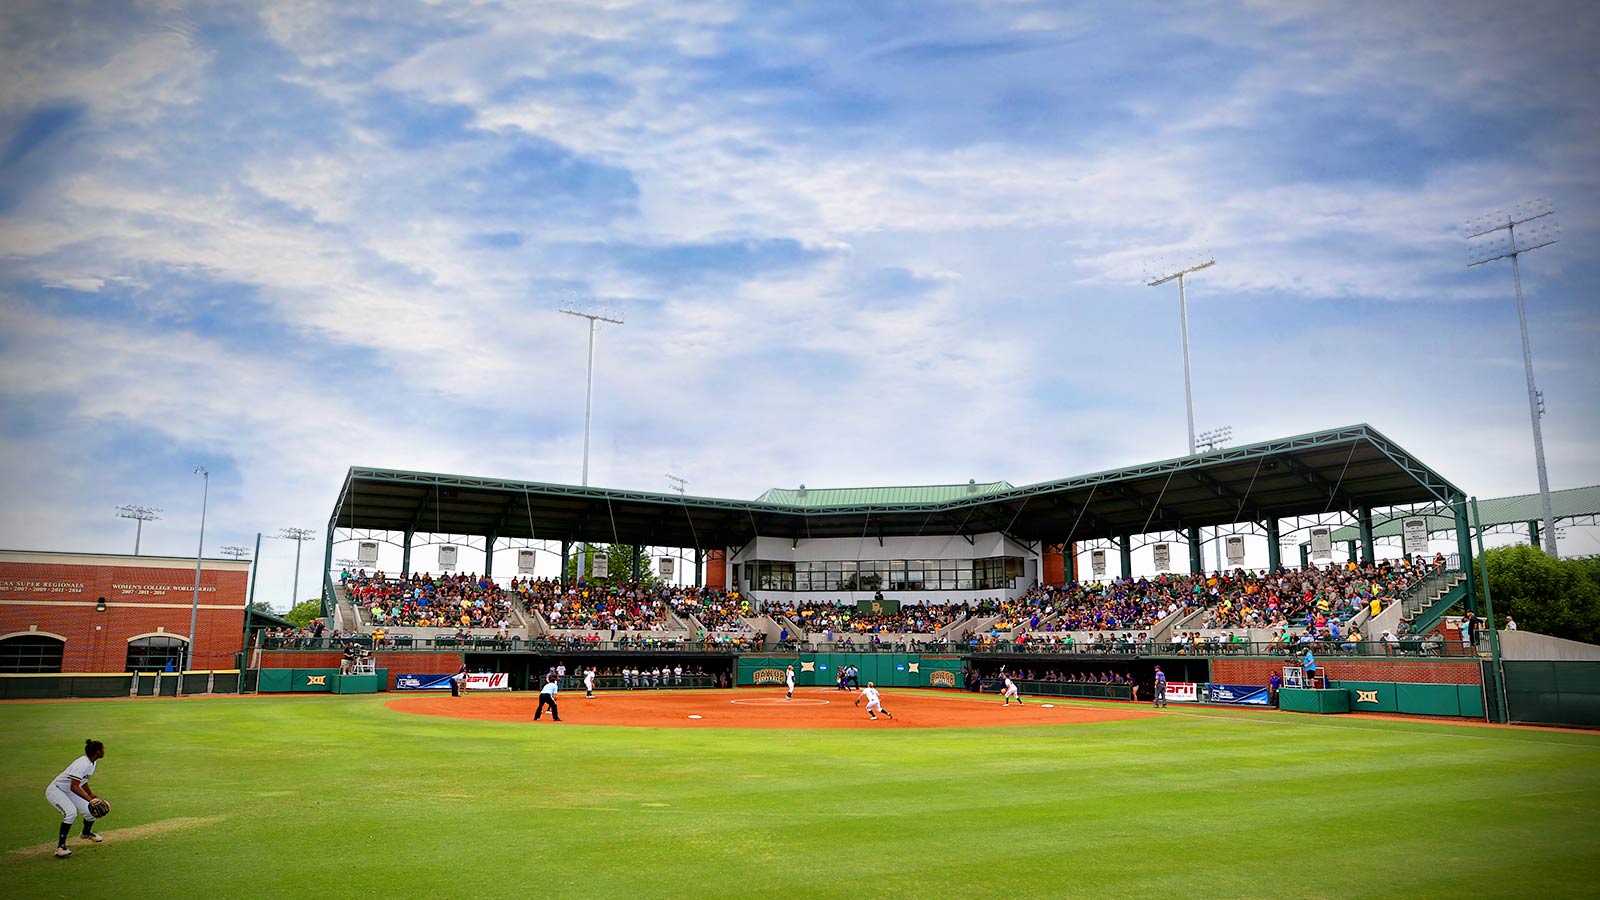 Getterman Stadium opened in 1999 and houses one of the nation's premier collegiate softball programs.